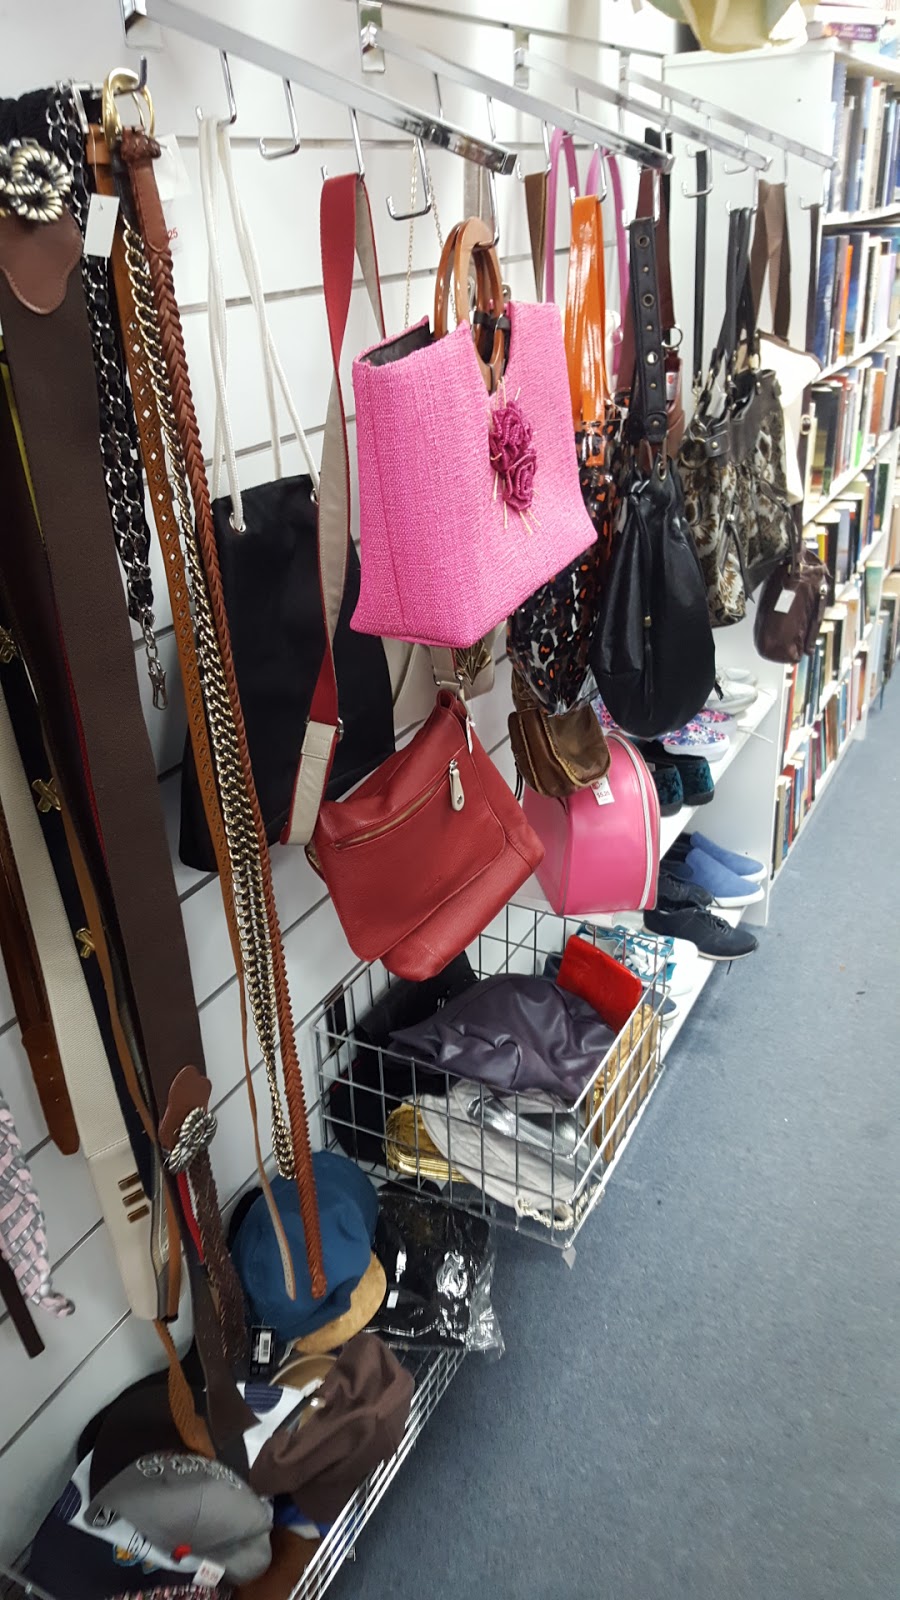 Salvos Stores Walkley Heights | store | Shop 1 Walkley Heights Shopping Centre, 1-11 R M Wiiliams Drive, Walkley Heights SA 5098, Australia | 0881625547 OR +61 8 8162 5547